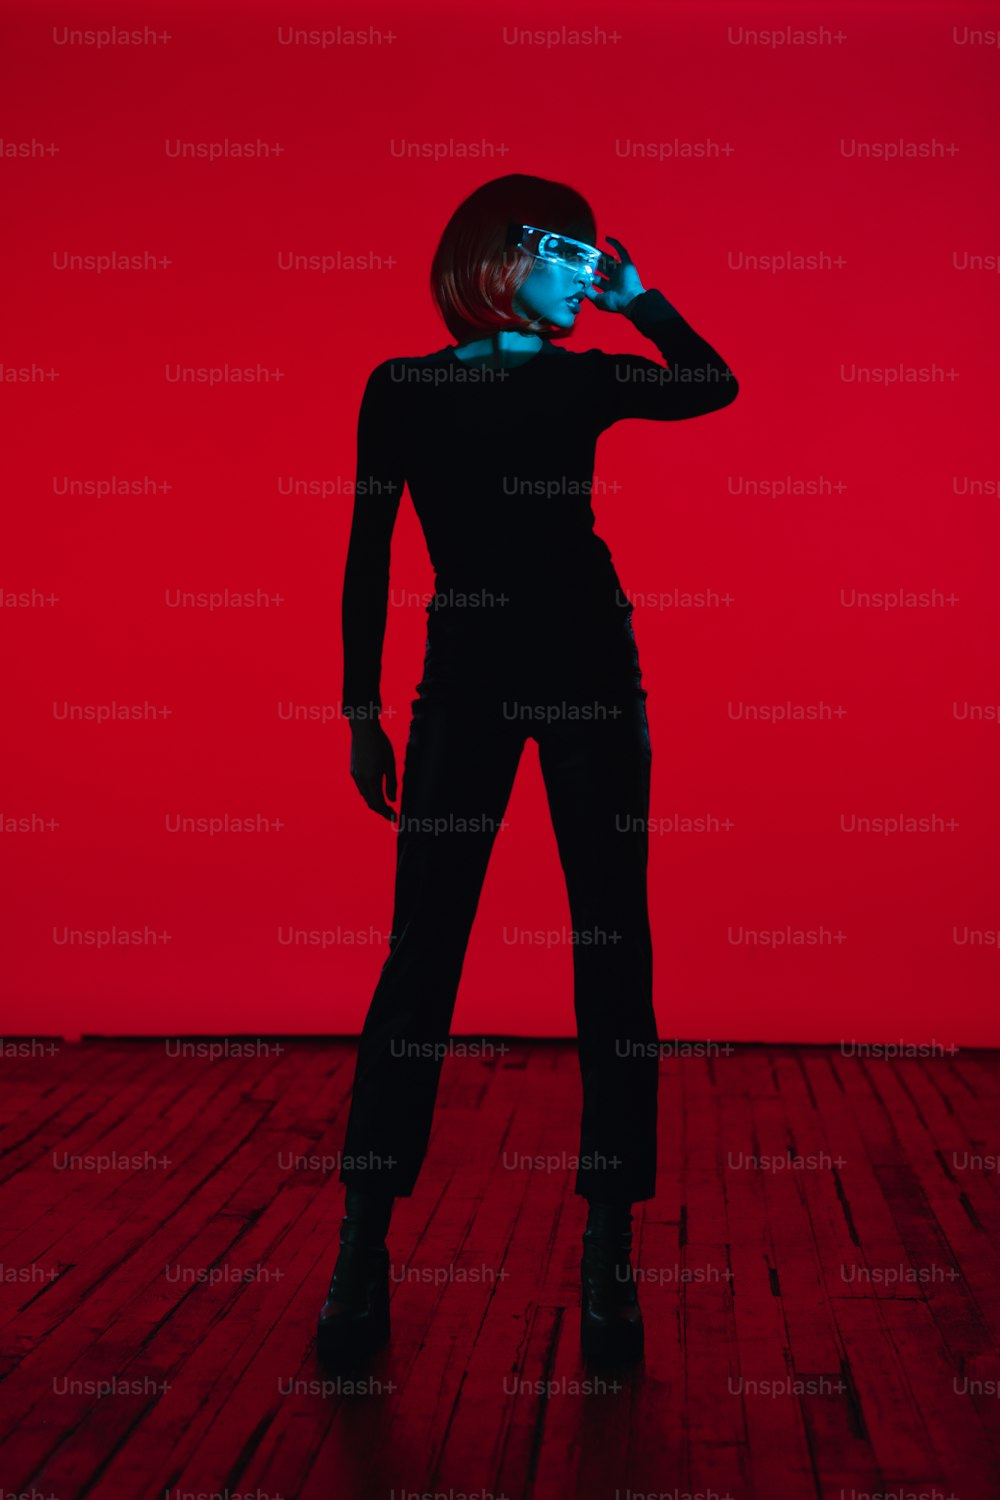 a woman standing on a wooden floor in front of a red wall